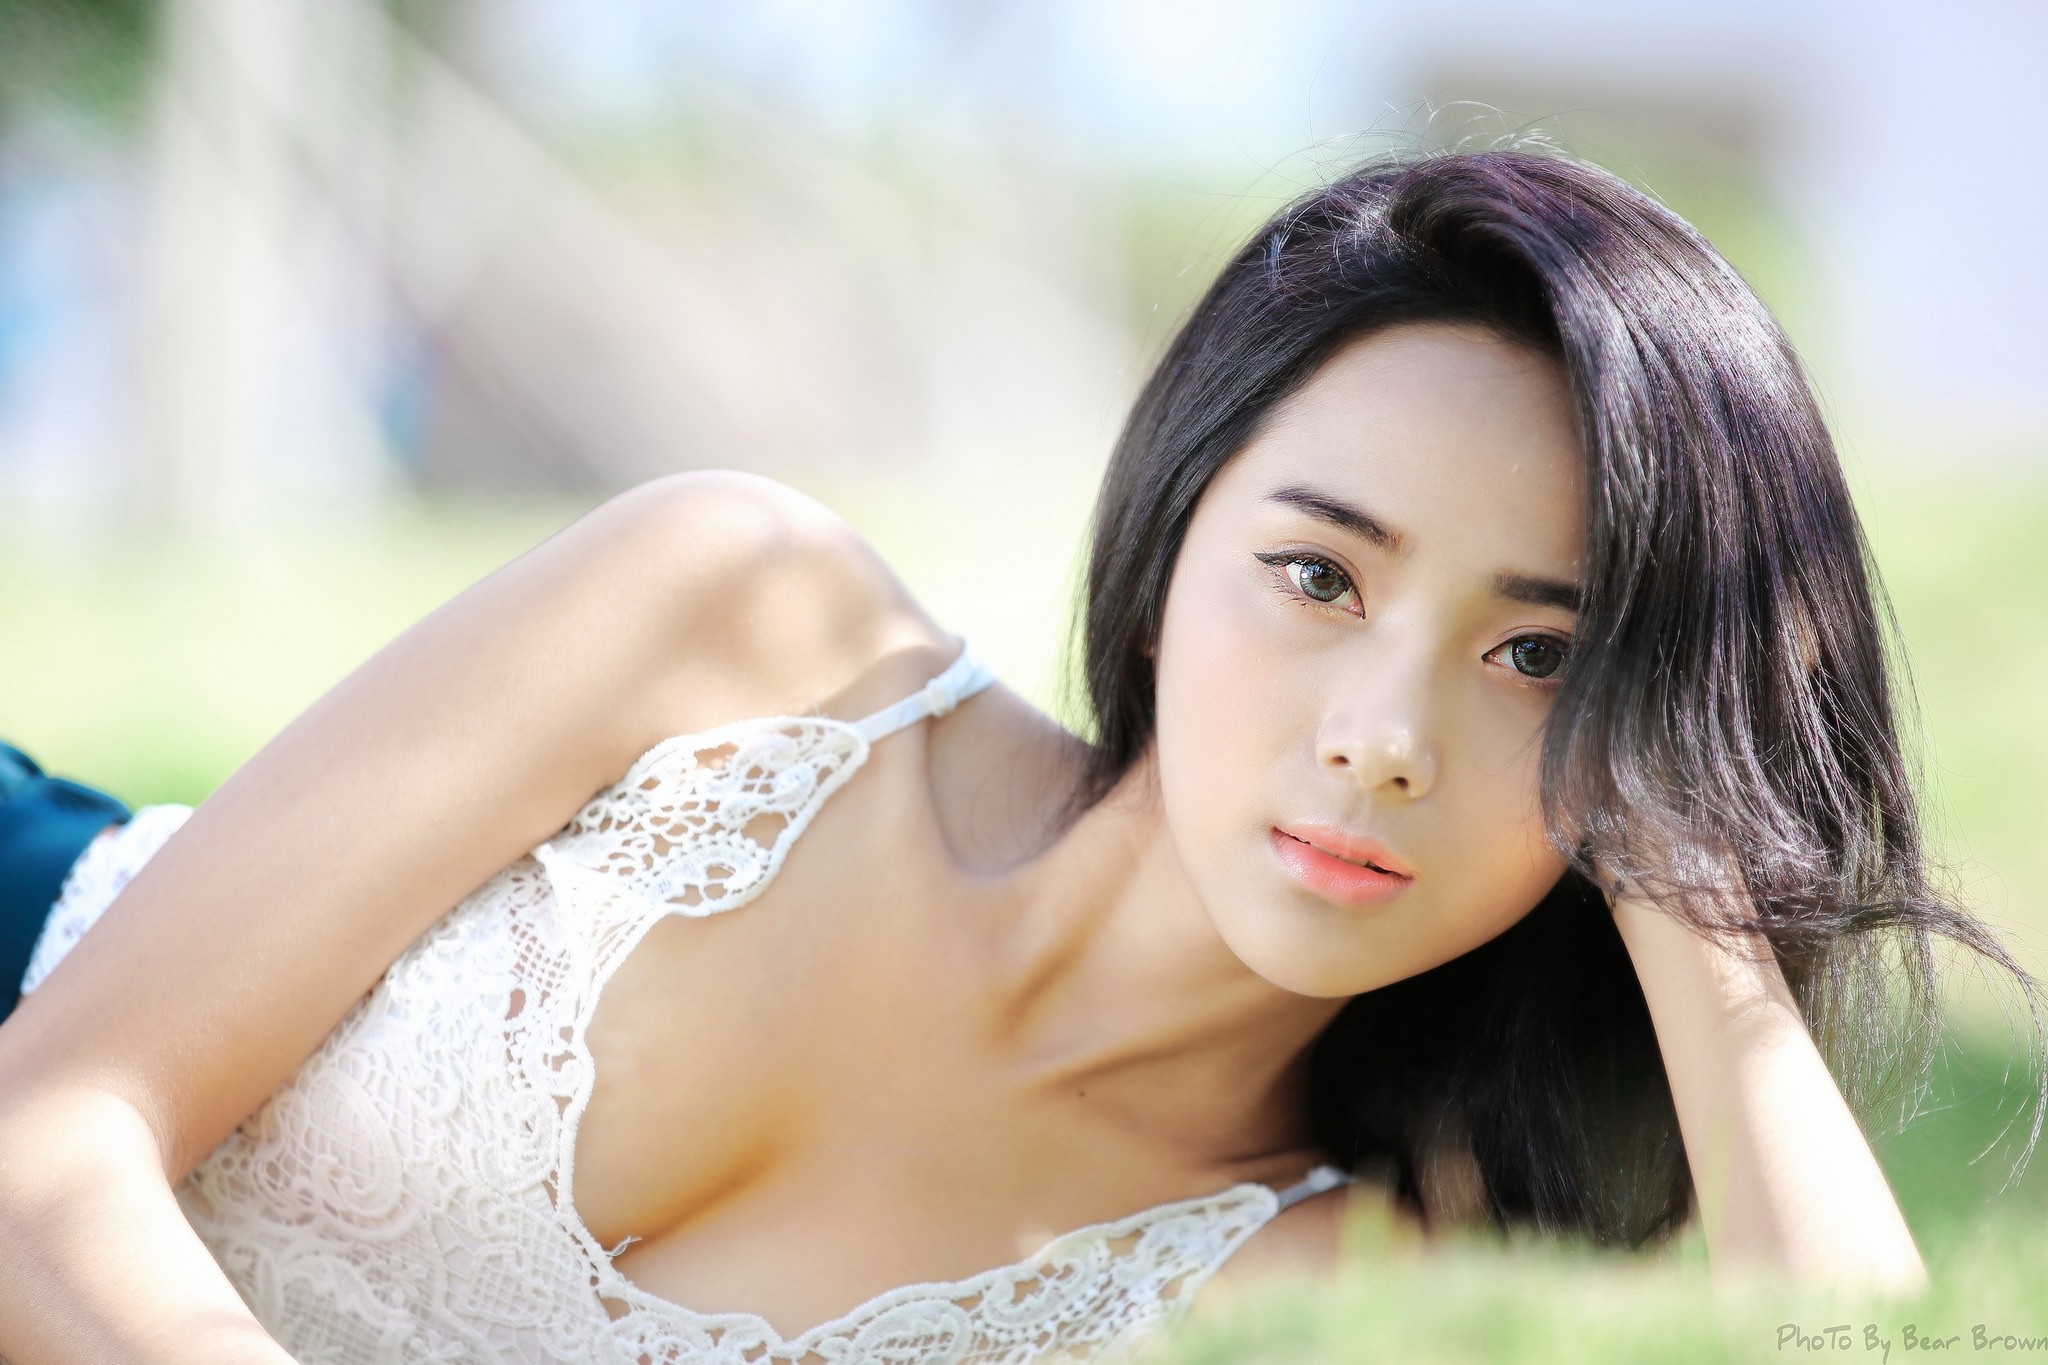 People 2048x1365 women brunette wavy hair lying down looking at viewer depth of field camisole cleavage gray eyes Asian Chinese women face closeup portrait dark hair women outdoors urban model